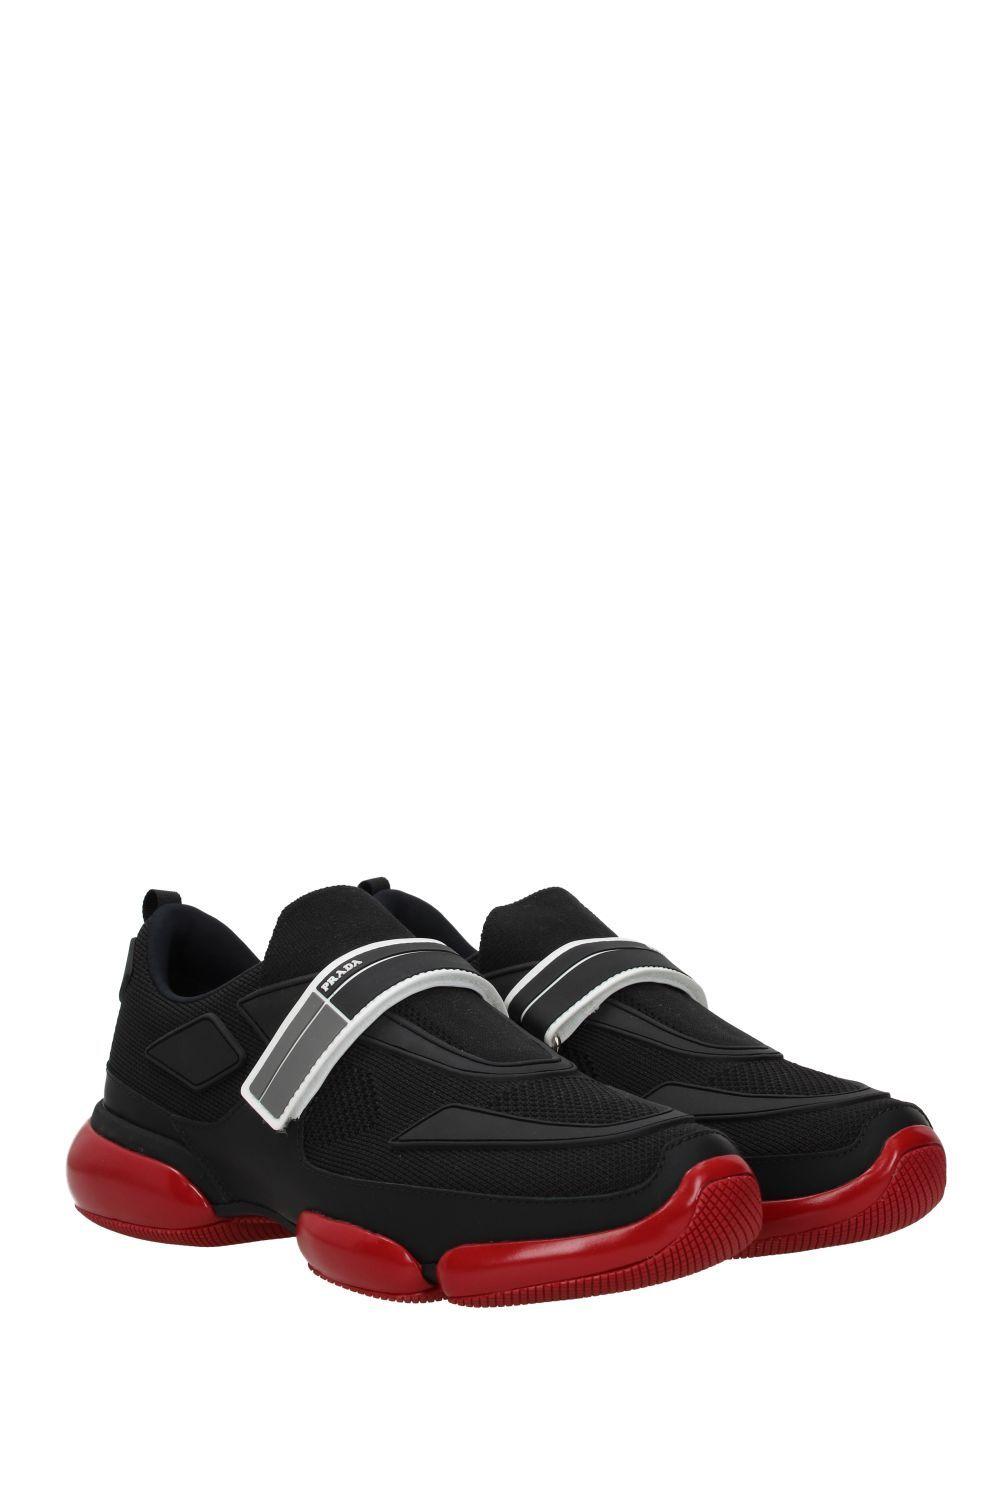 Prada Leather Black And Red Cloudbust Sneakers for Men - Lyst